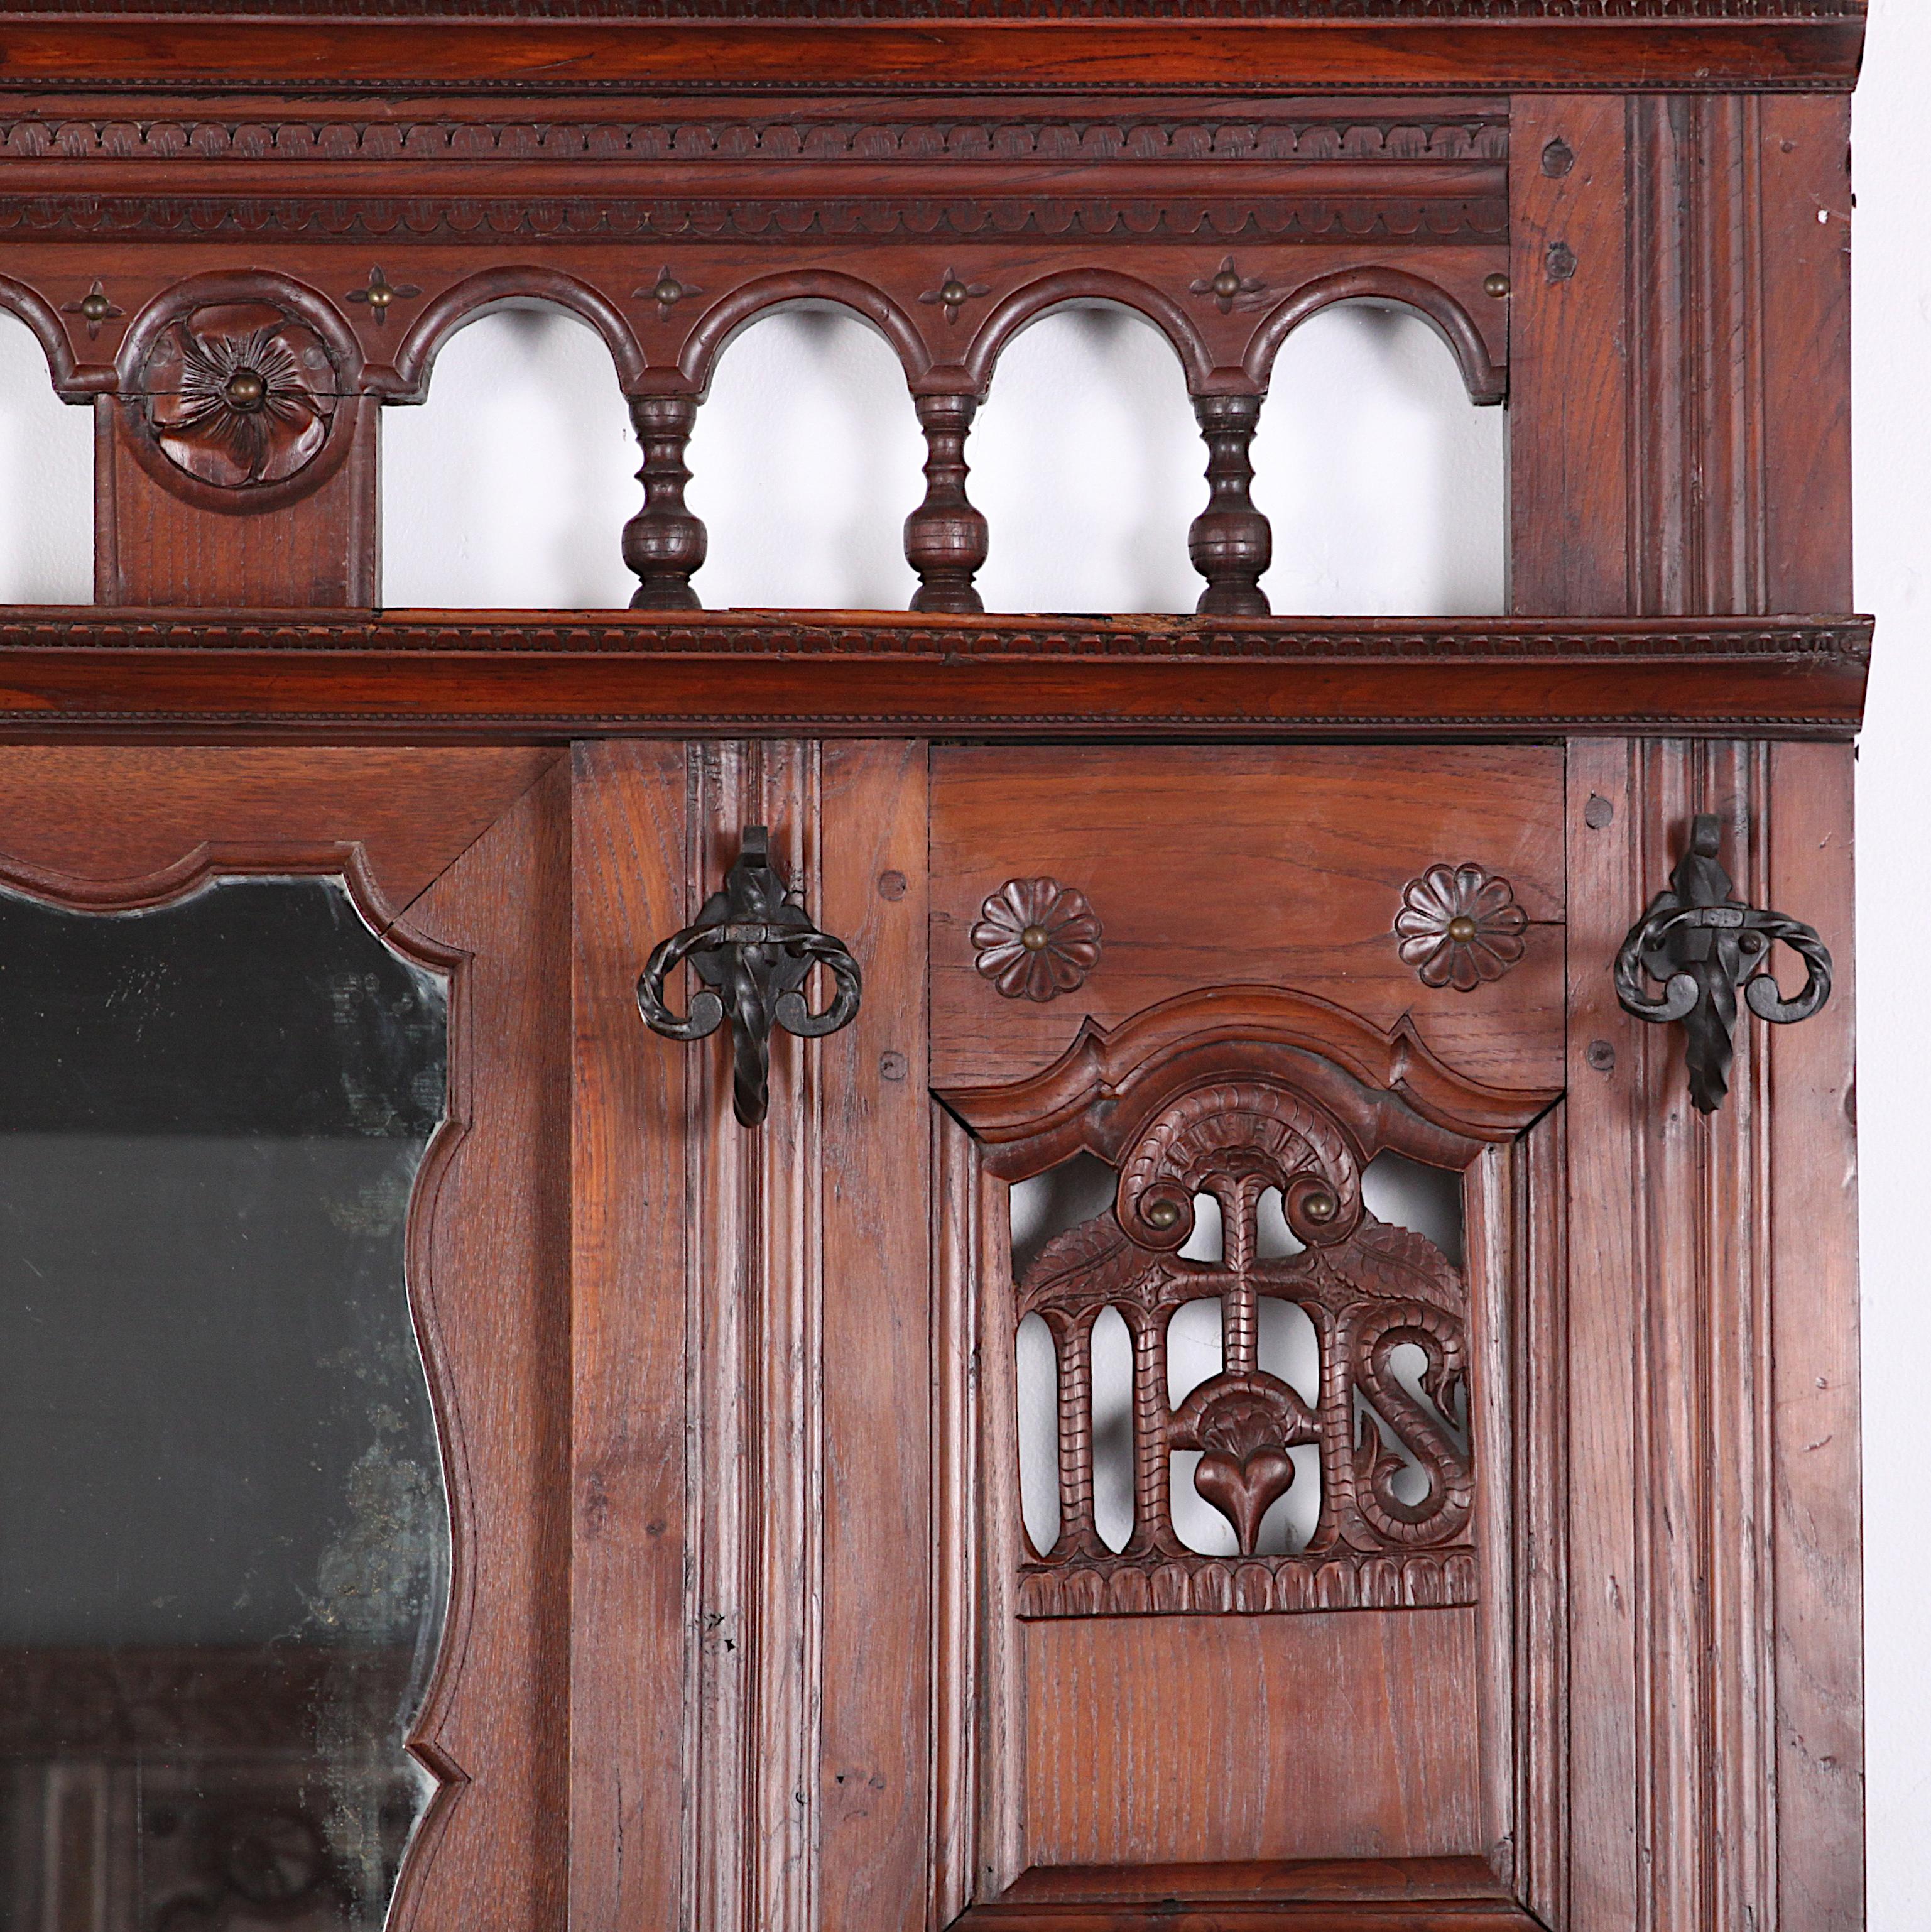 A 19th century French oak and elm hallstand or coat rack with shaped panels and pierce-carved details, originally the facade of a Breton 'lit close' or enclosed bed. C. 1880.